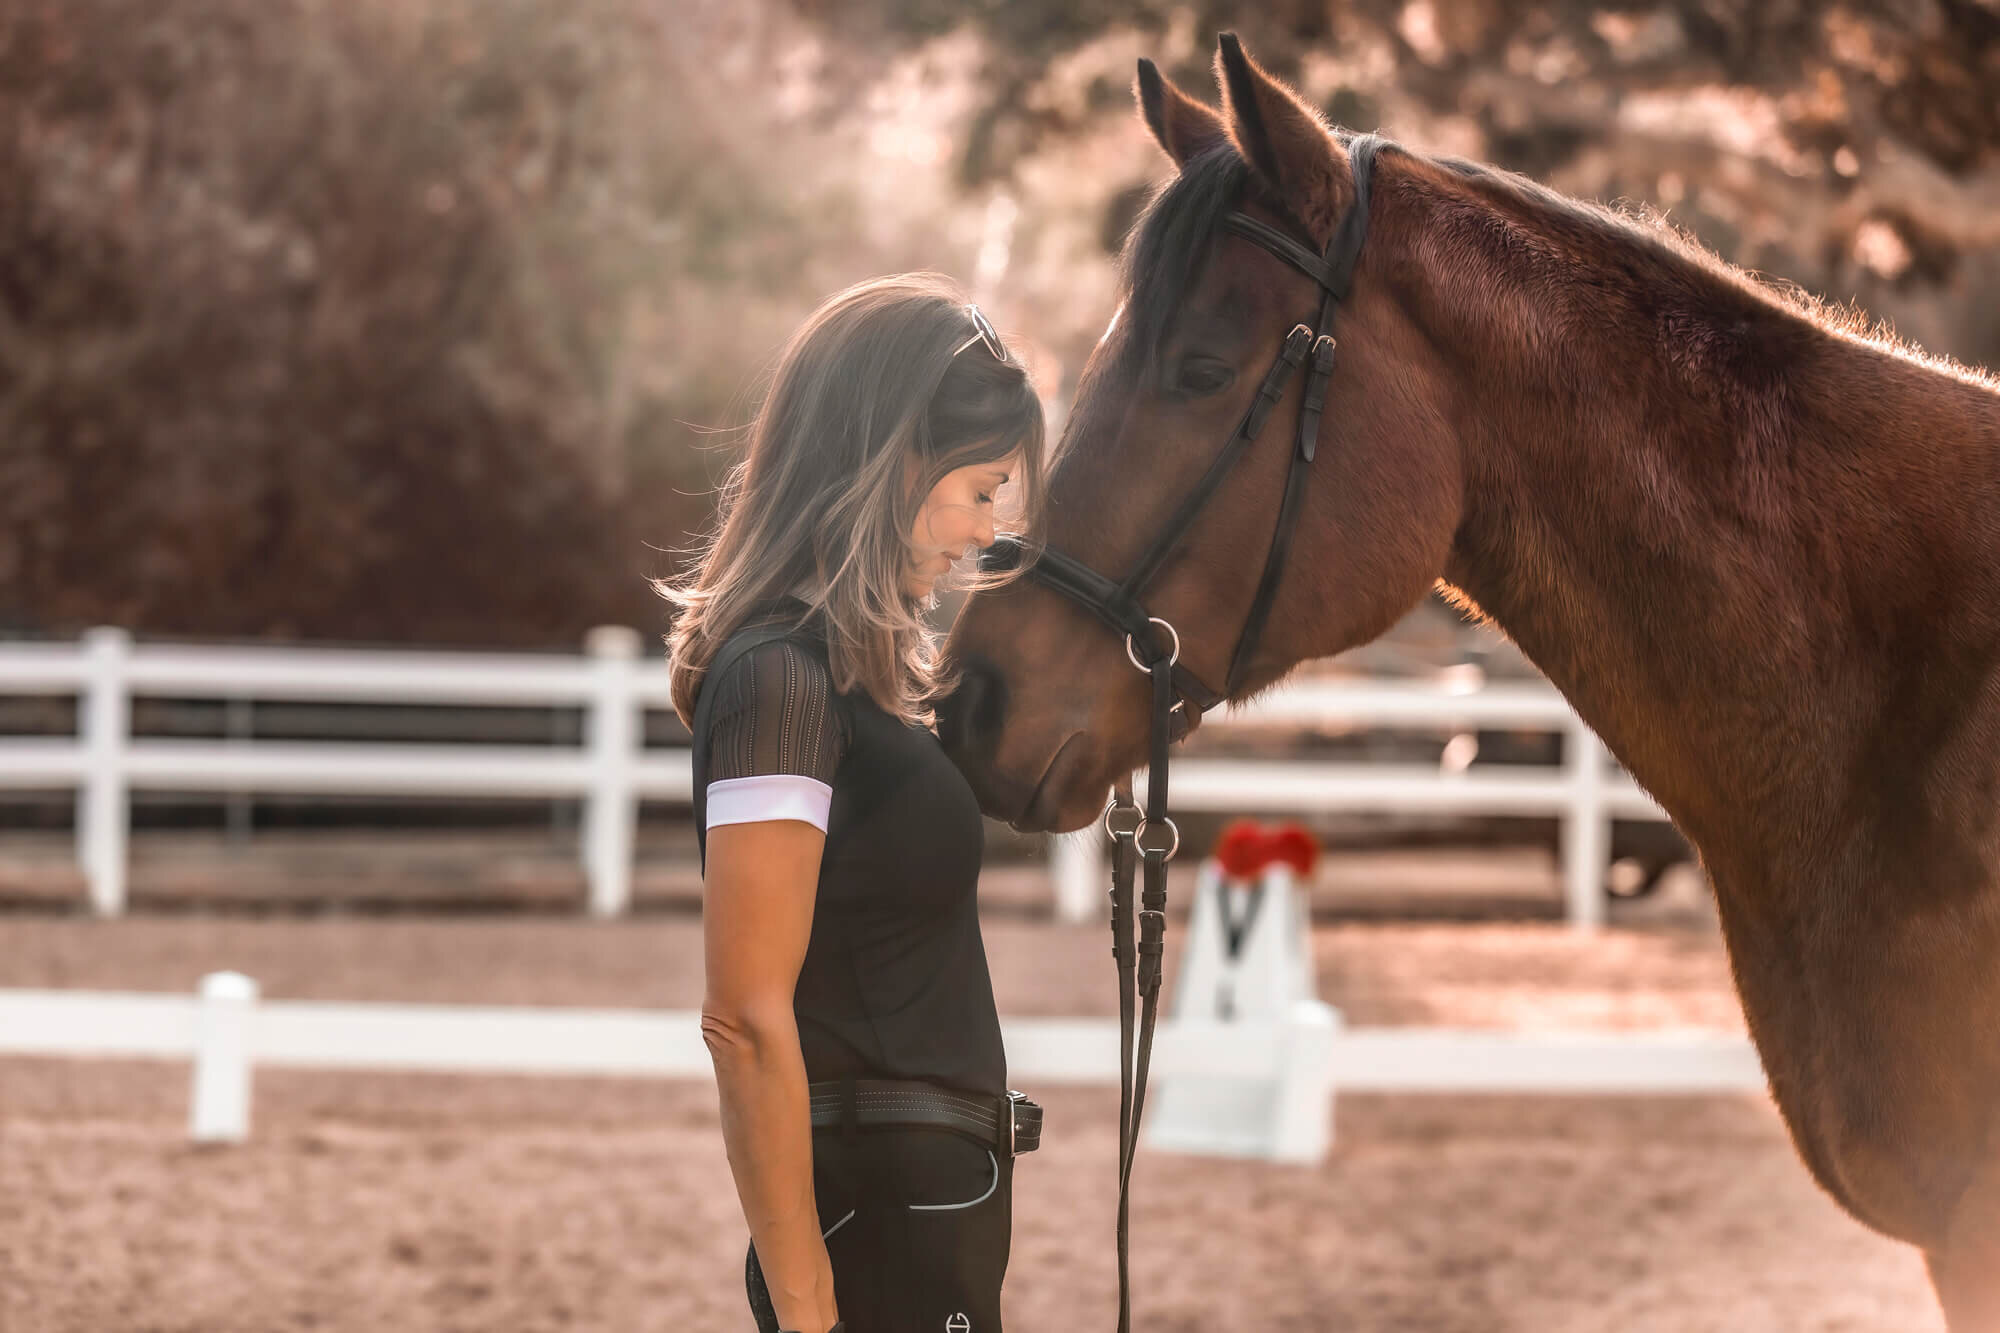 Designer nose-to-nose with her horse.